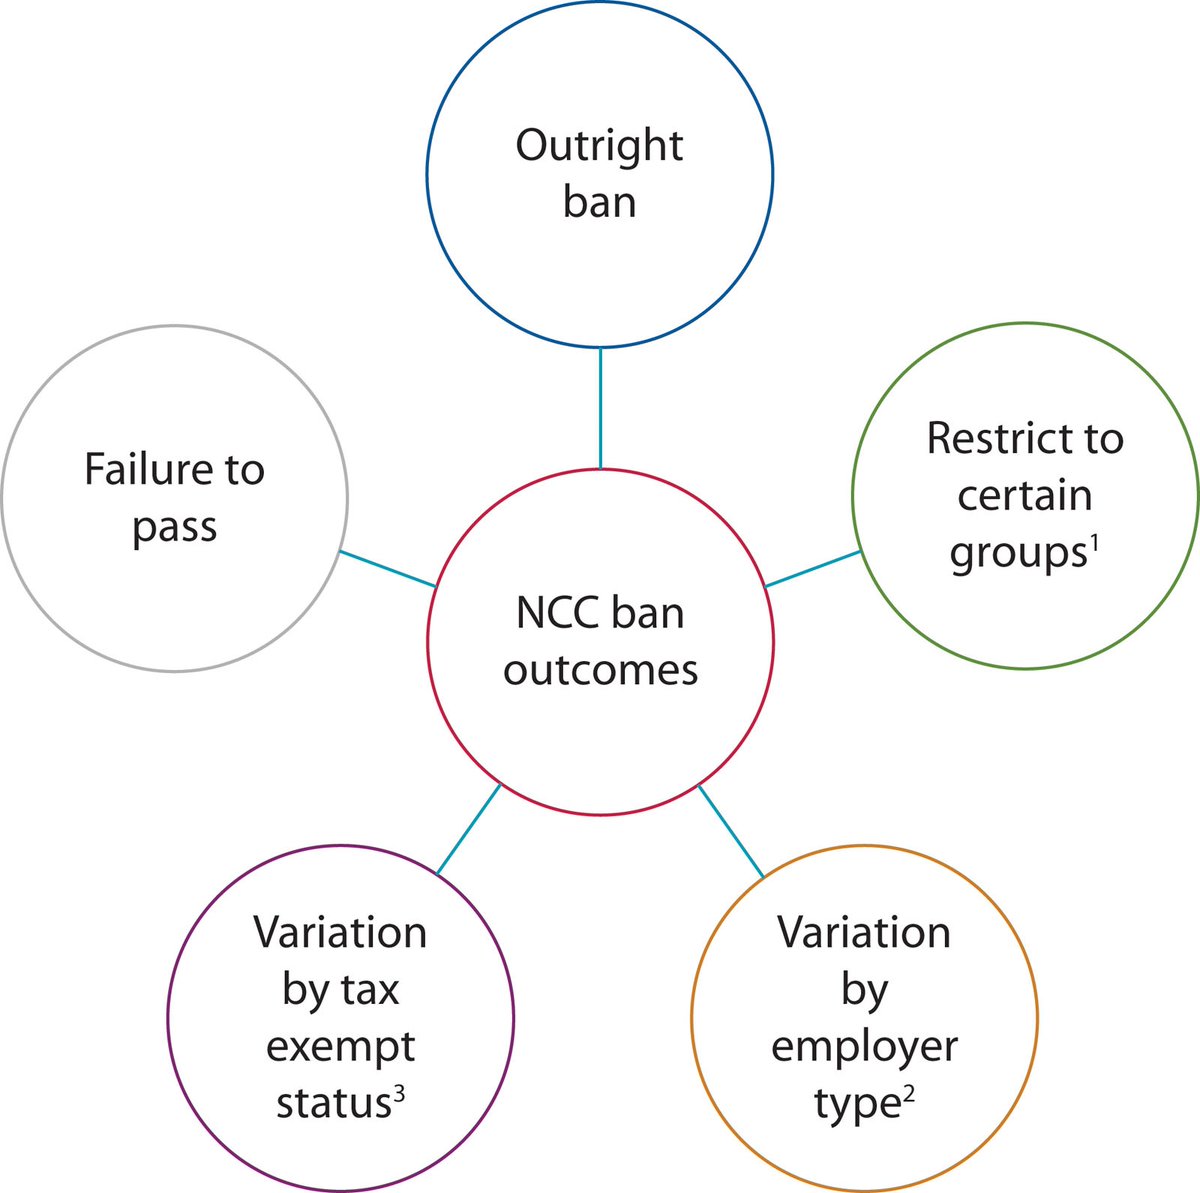 What Every Colorectal Surgeon Needs to Know about the Proposed Limitations to Noncompete Clauses - exclusively in #DCRJournal: bit.ly/3xBx6zA

@JohnRTMonsonMD @jendavidsmd @ScottRSteeleMD @Swexner @me4_so @ACPGBI @drtracyhull @ASCRS_1